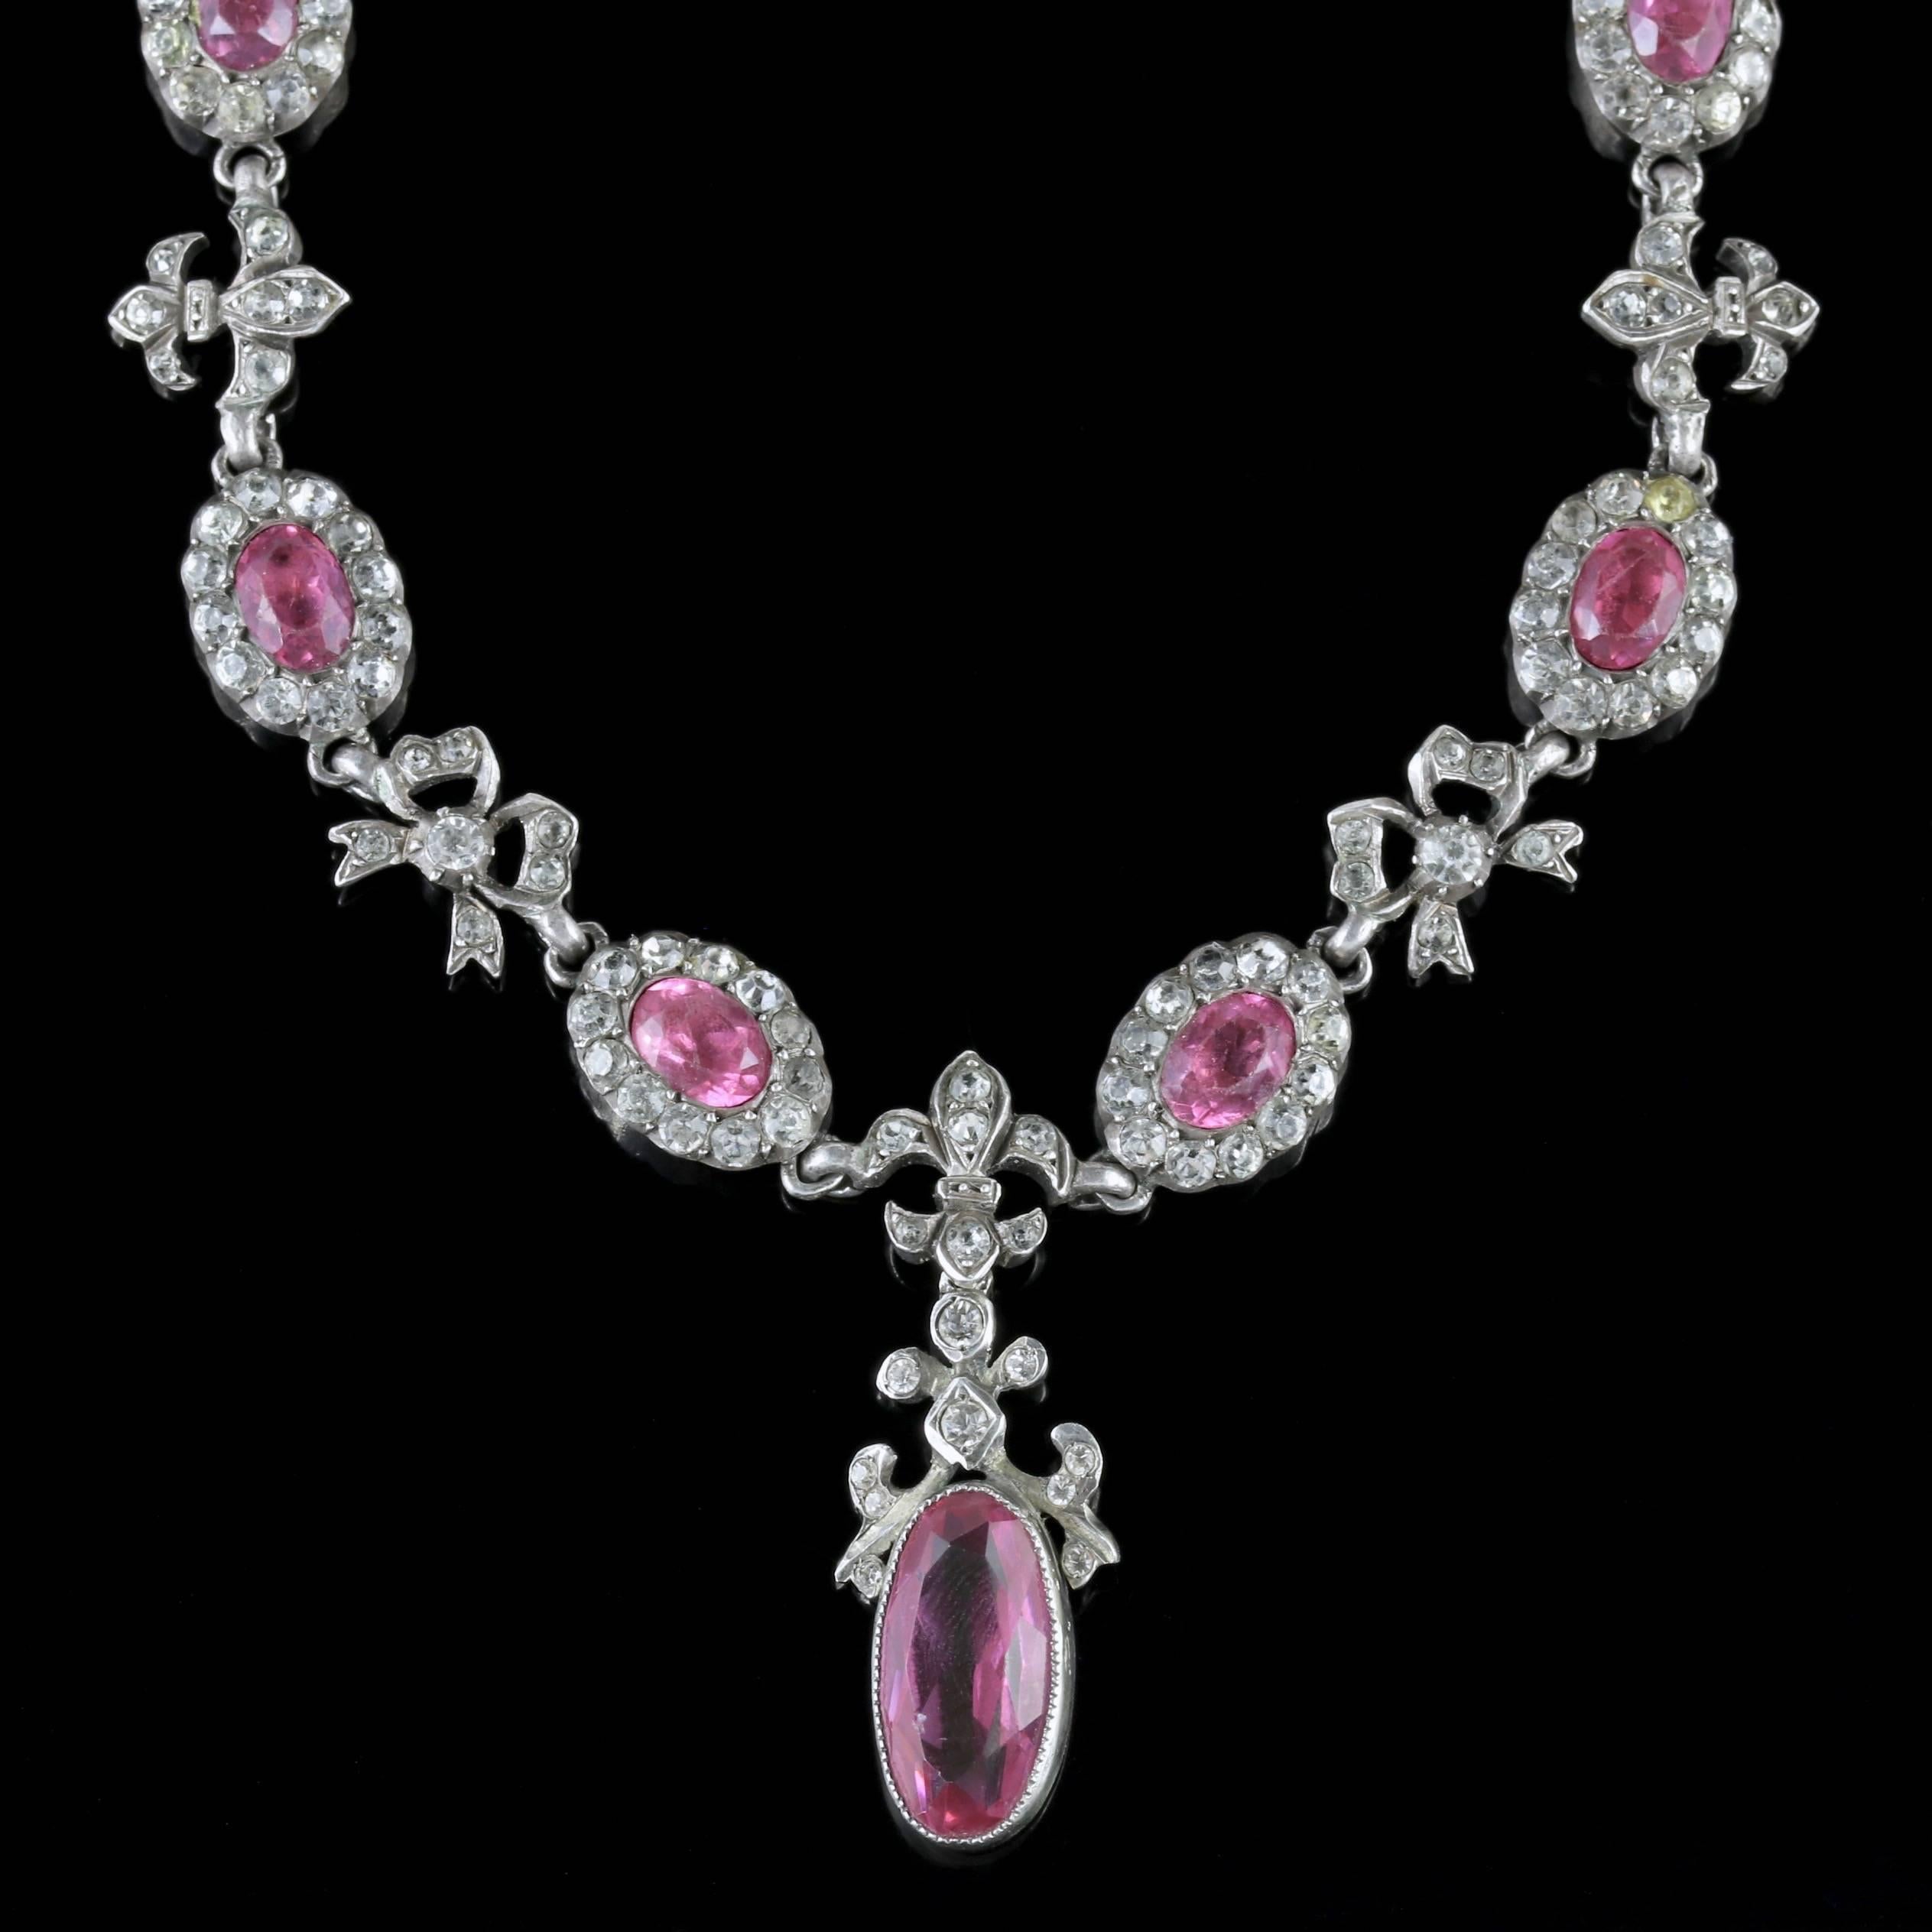 To read more please click continue reading below-

This fabulous antique French Belle Époque Necklace was made during the Victorian era, Circa 1890.

The Belle Époque, or the ‘Beautiful era’ spanned three distinct jewellery periods from 1890 -1915.